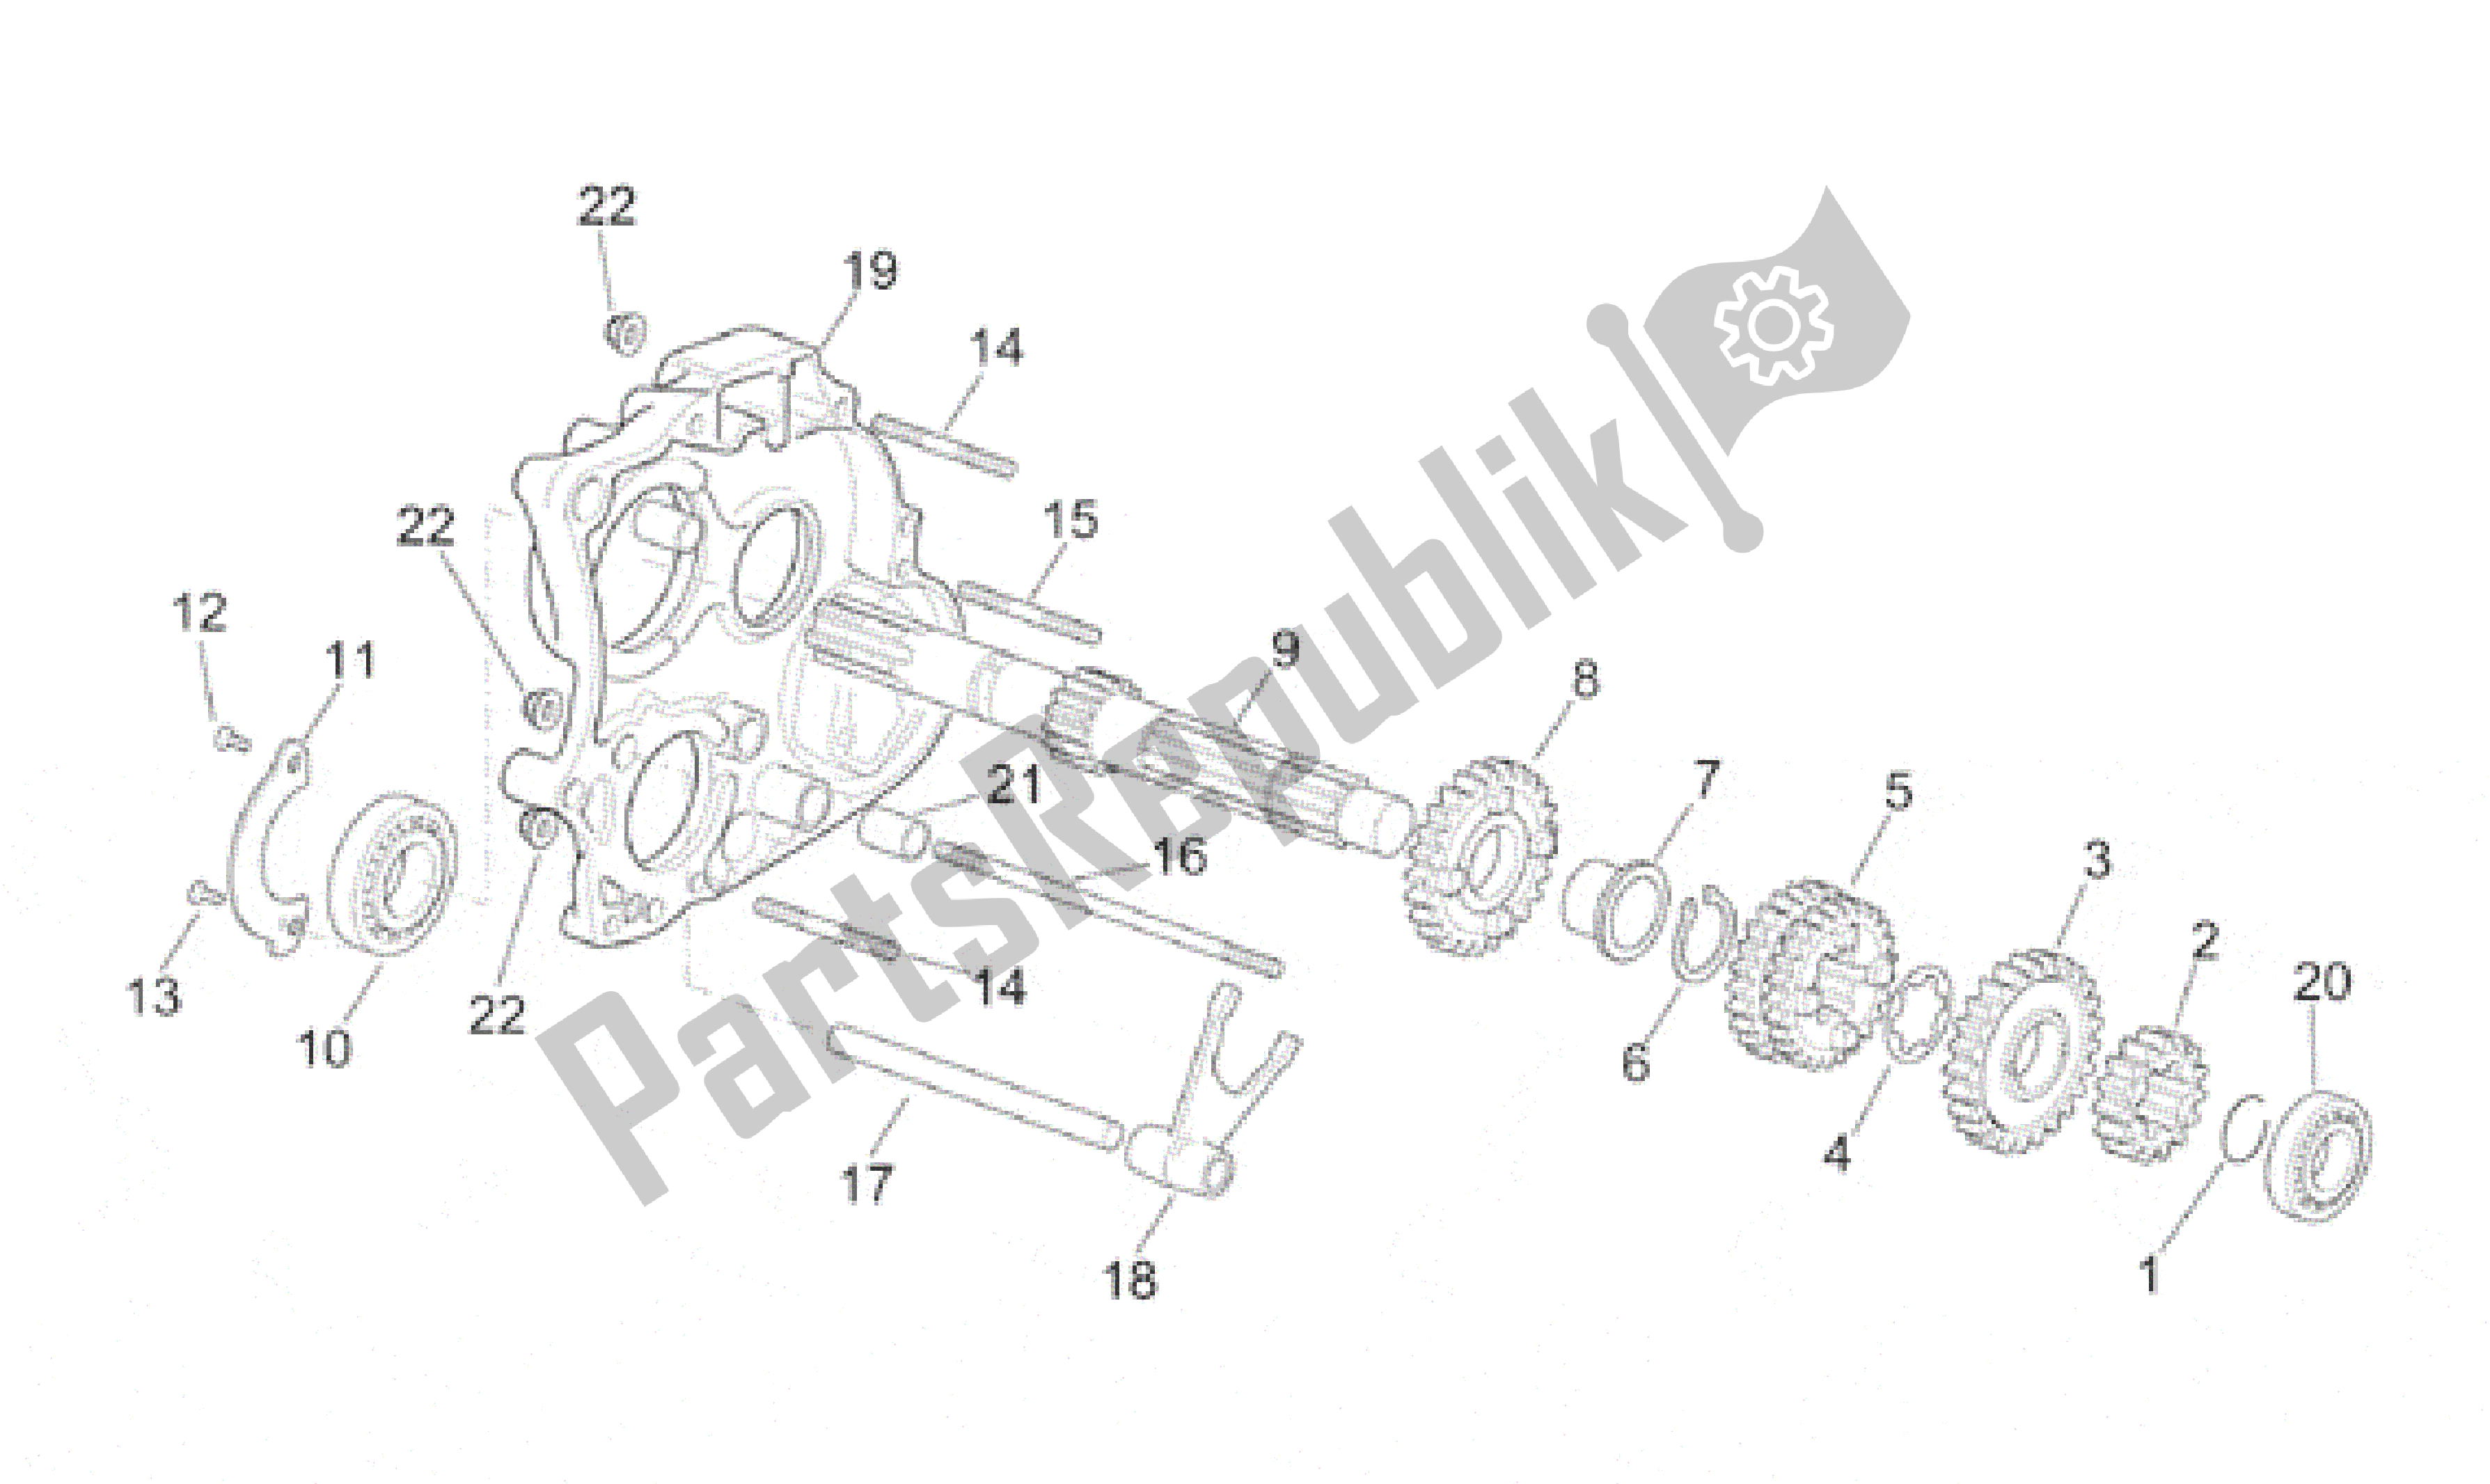 All parts for the Primary Gear Shaft of the Aprilia RS 250 1995 - 1997